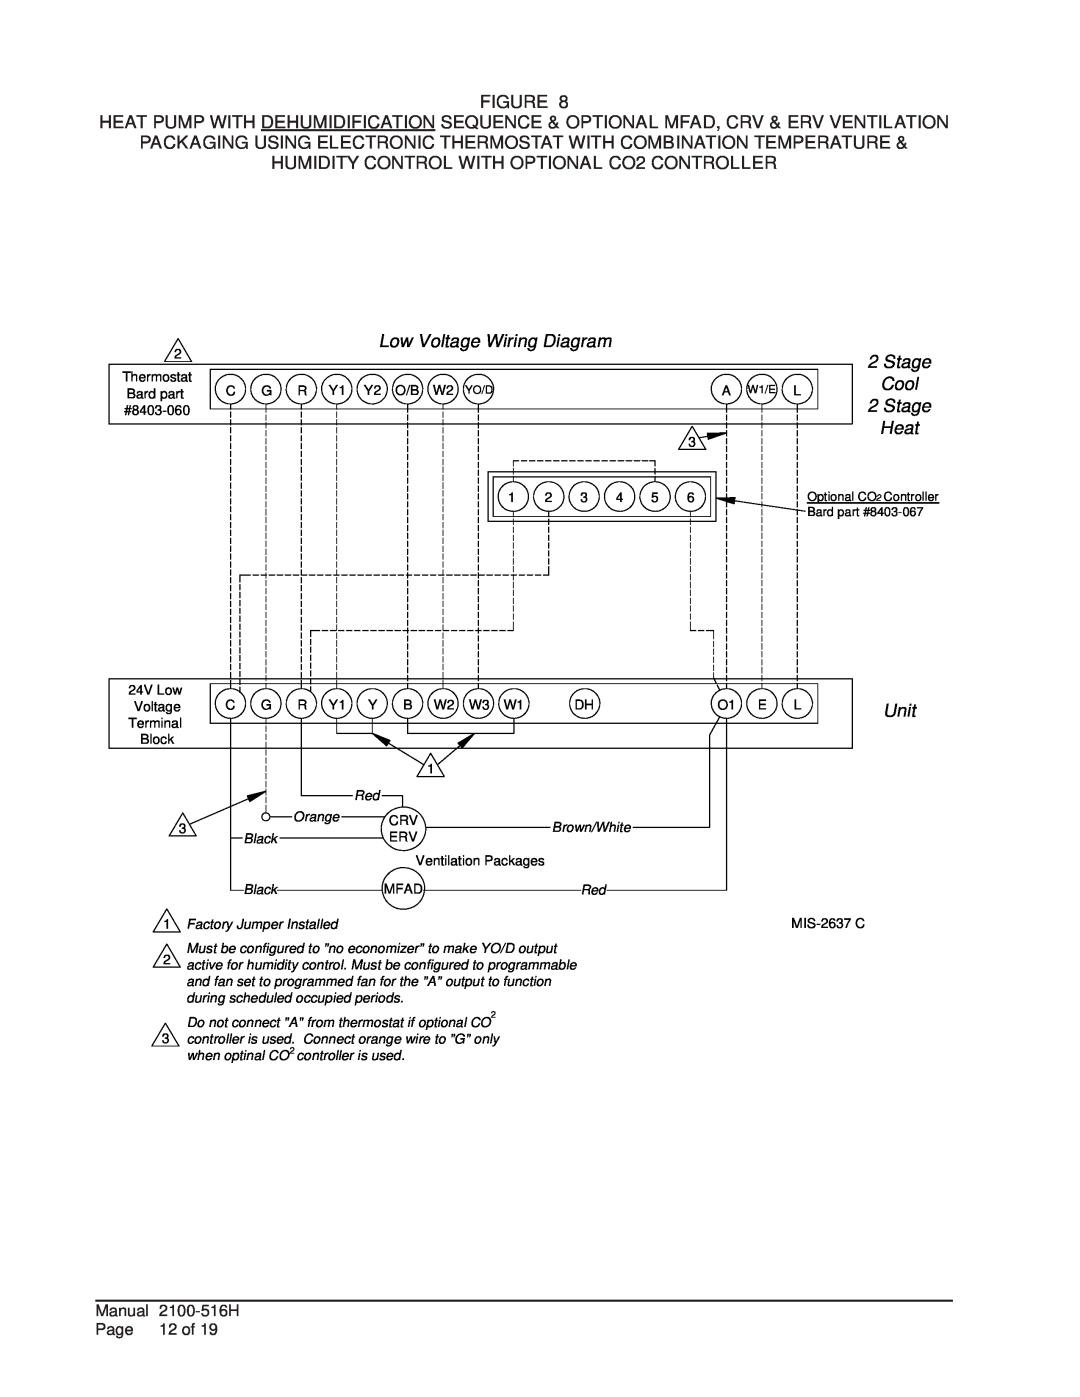 Bard W**H*D, S**H*D, T**H*D installation instructions Low Voltage Wiring Diagram, Cool, Unit, Stage, Heat 